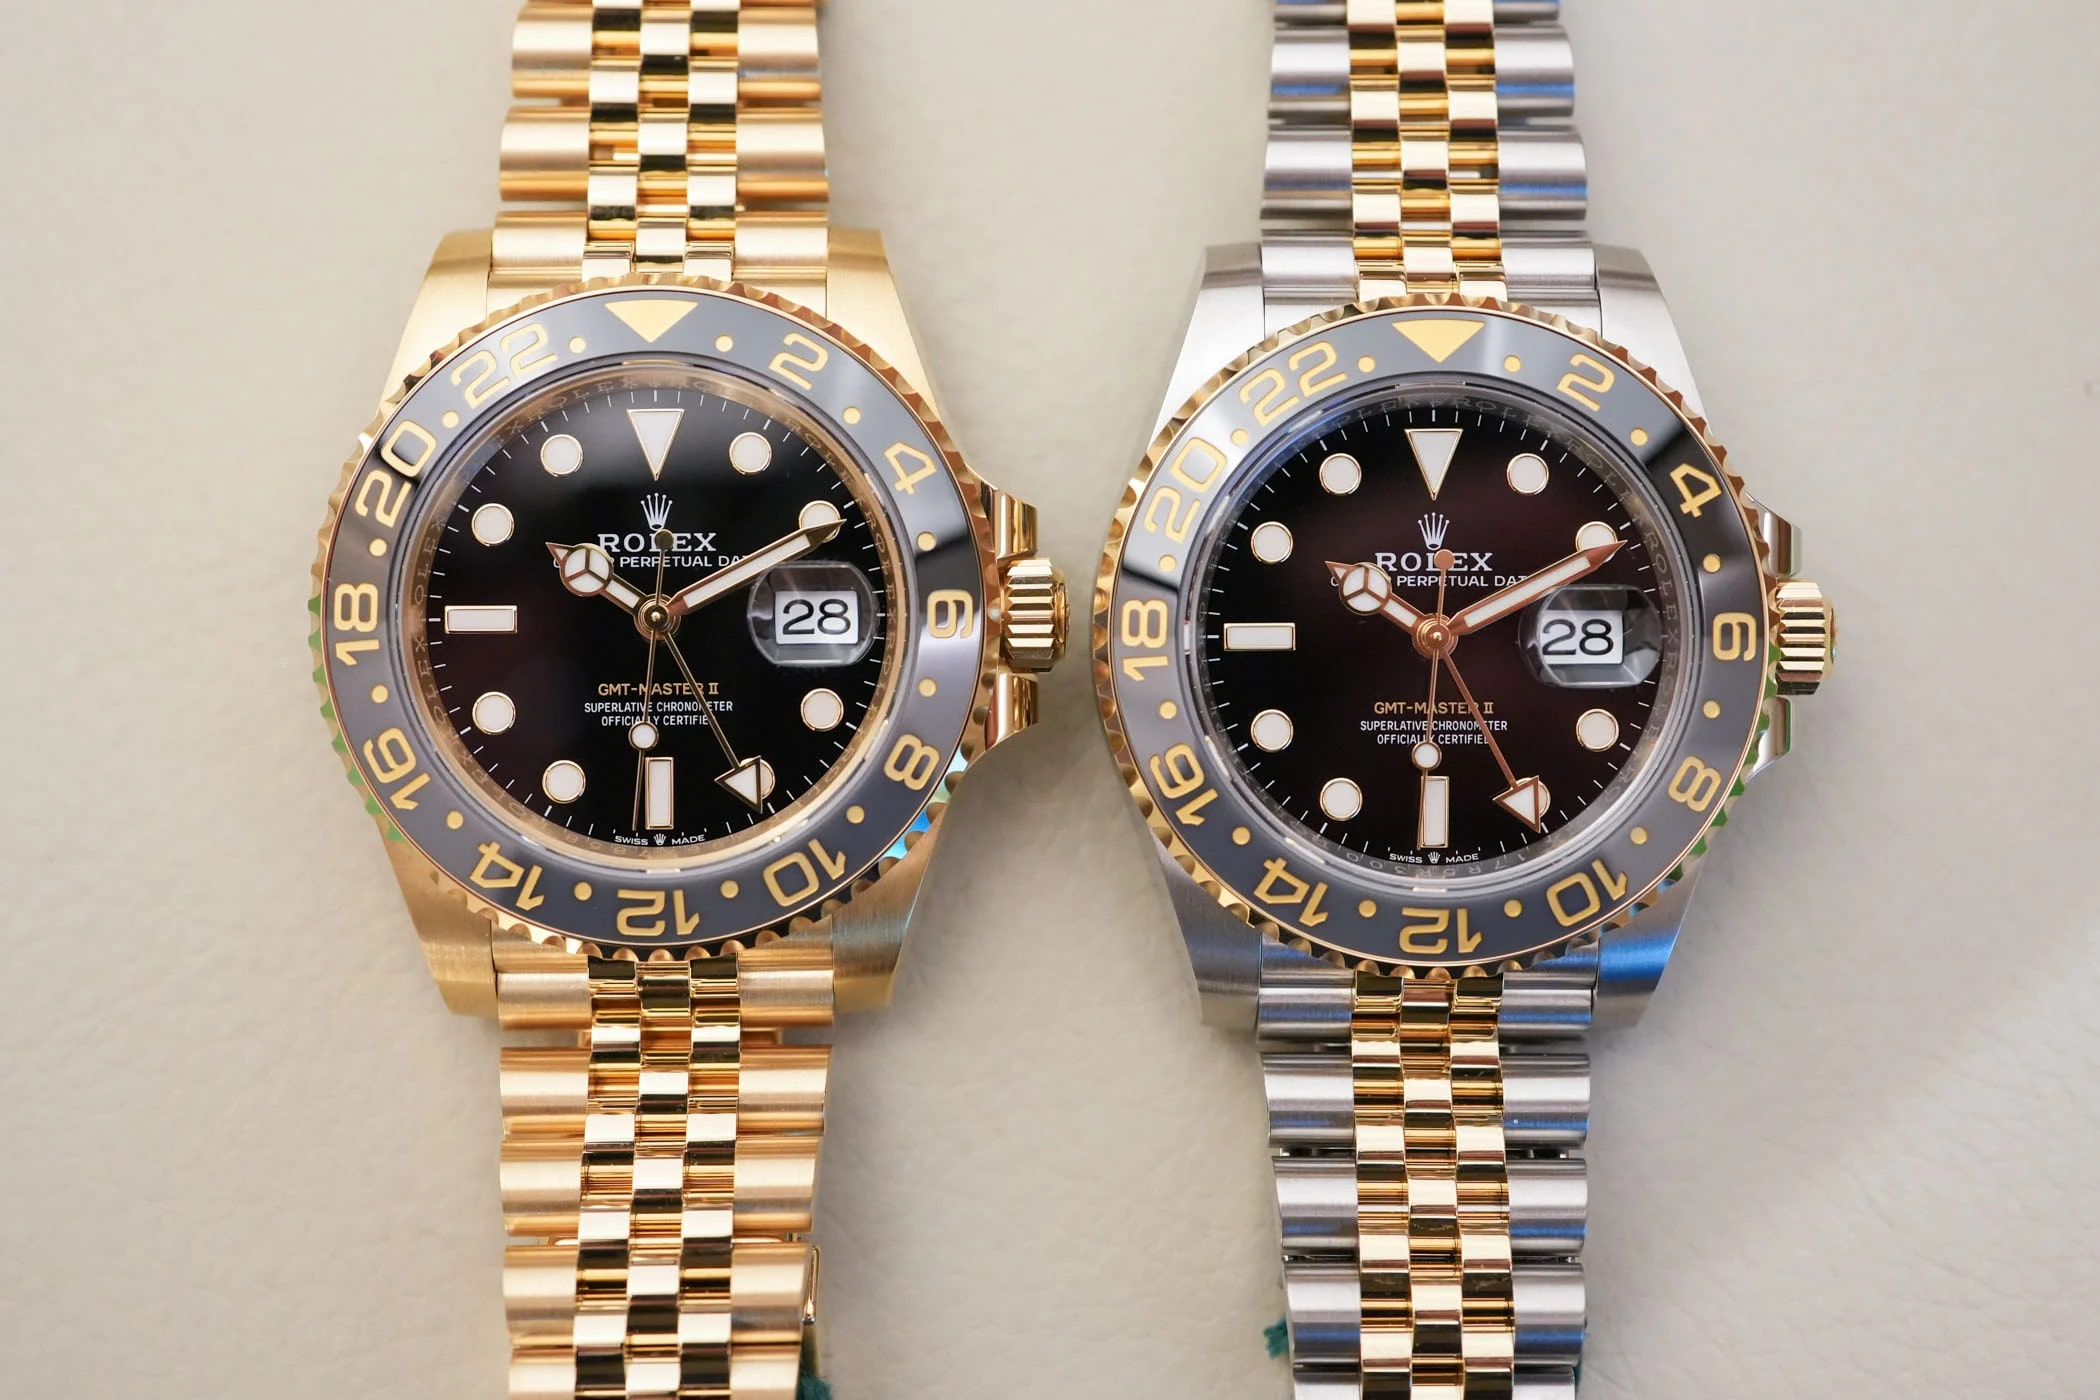 All-2023-Rolex-New-Models-Live-Photos-hands-on-New-2023-Rolex-GMT-Master-II-GRNR-Yellow-Gold-2.jpg